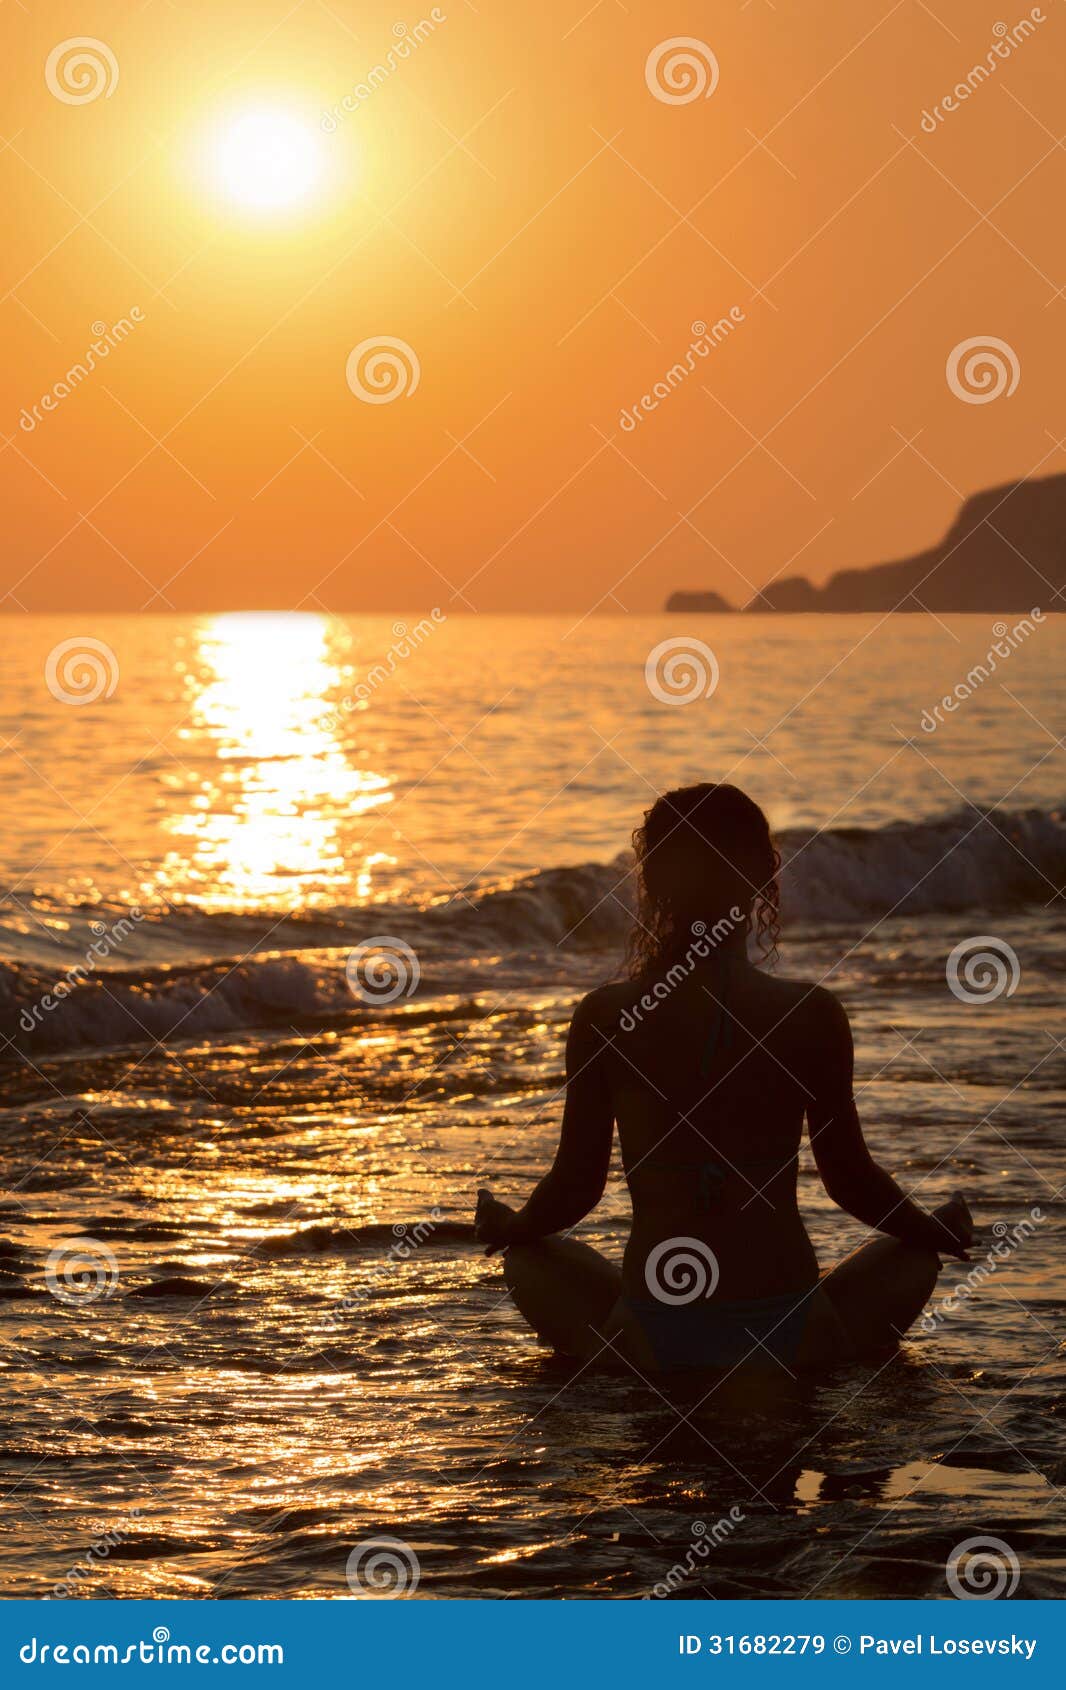 Yoga Pose At The Beach During Sunset Stock Photo